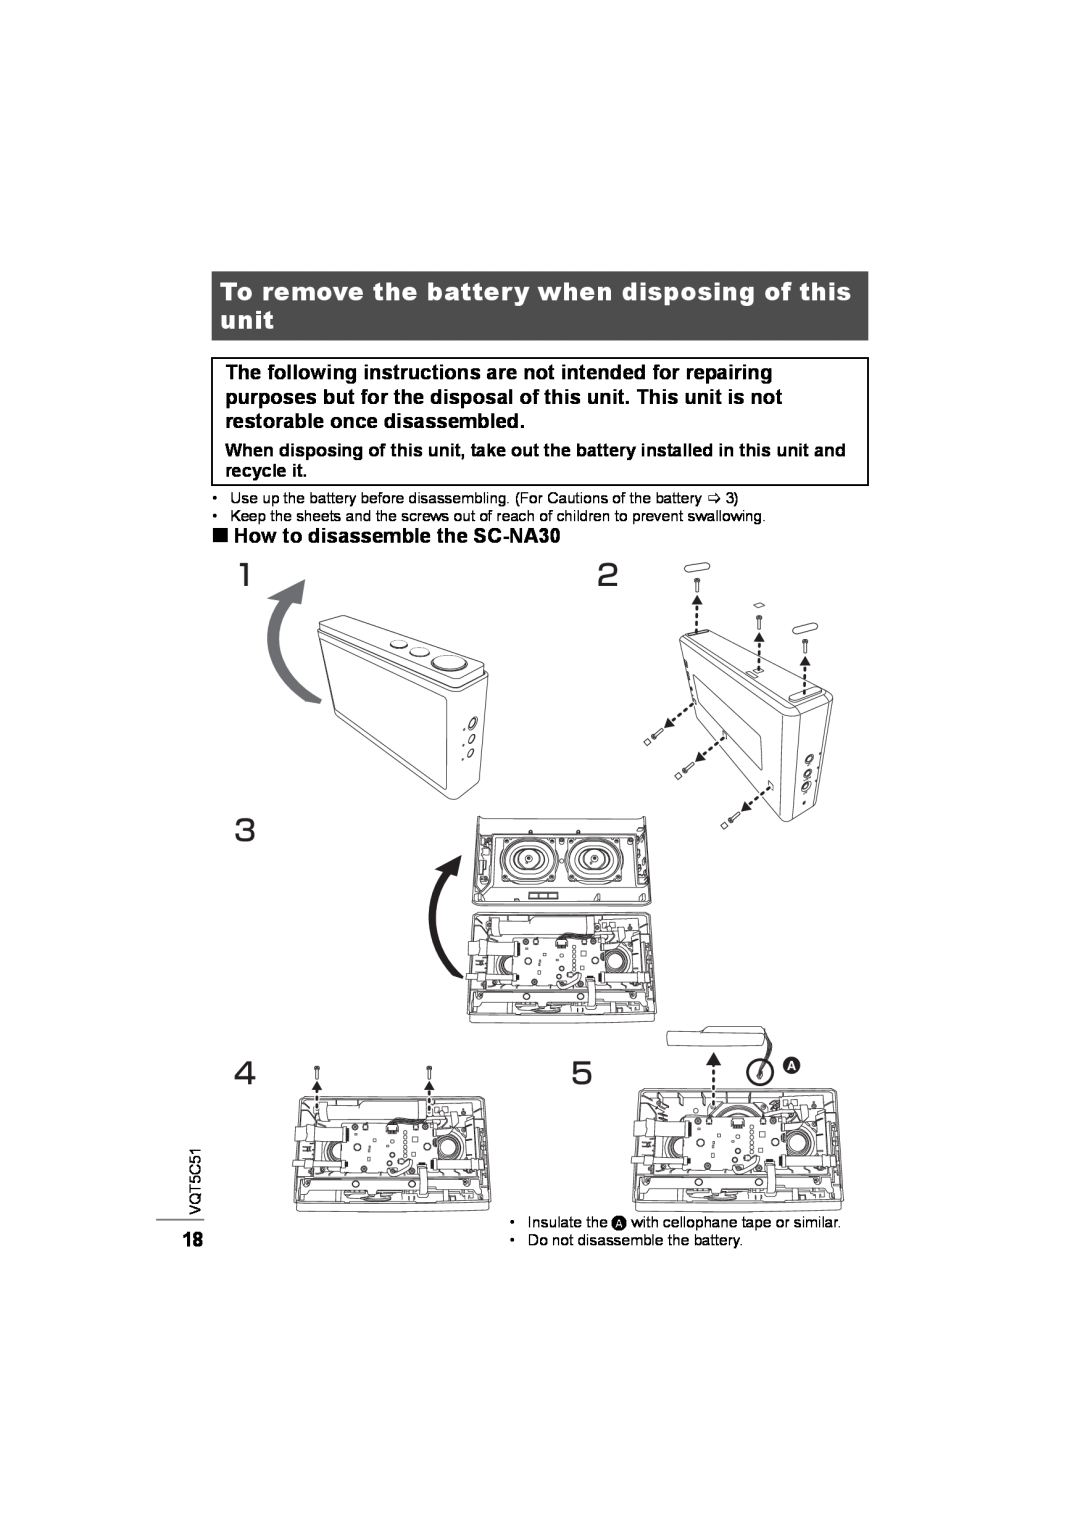 Panasonic SC-NA30/SC-NA10 manual To remove the battery when disposing of this unit, How to disassemble the SC-NA30 